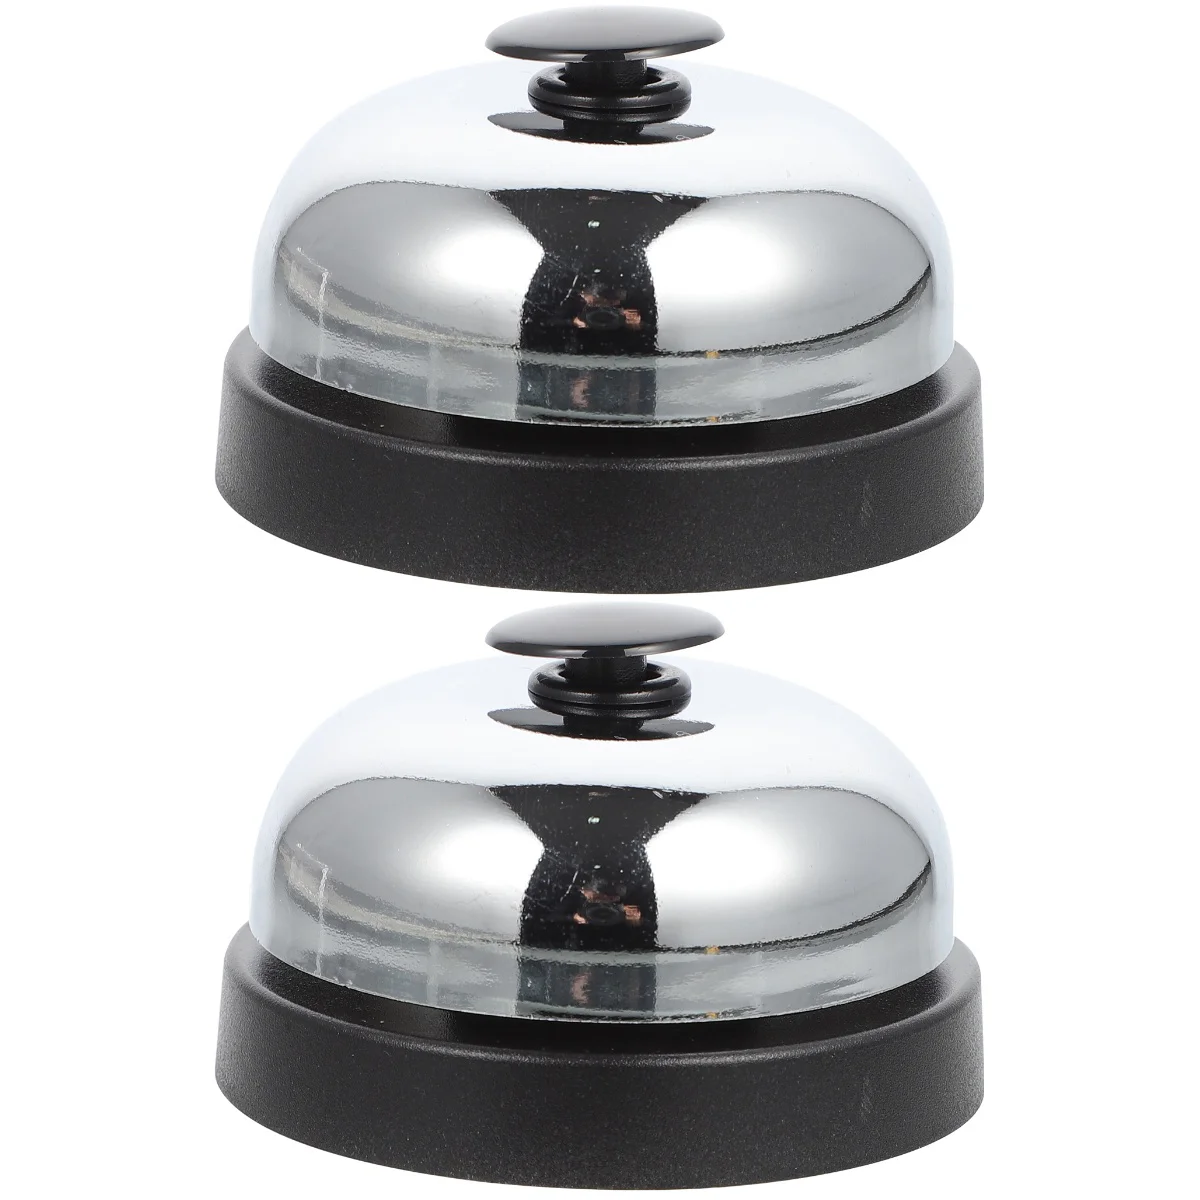 

2pcs Desk Bell Ringer Table Signs: Service Ring Call Bell for Restaurant Hotel Home Training Aloud Customer Supplies Black